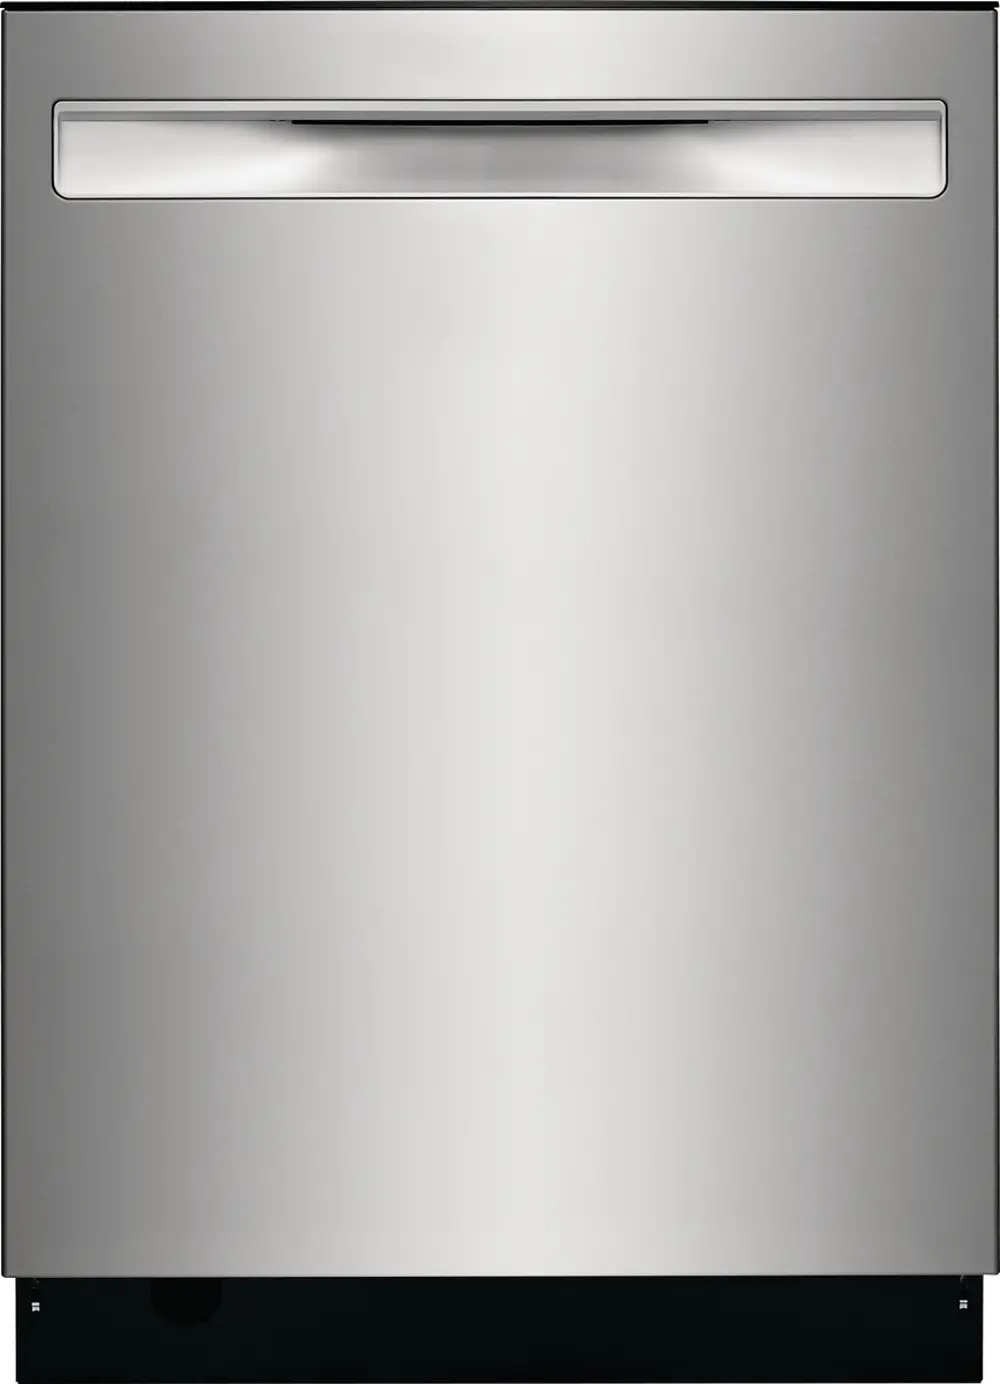 FGIP2479SF Frigidaire Top Control Dishwasher - Stainless Steel-1